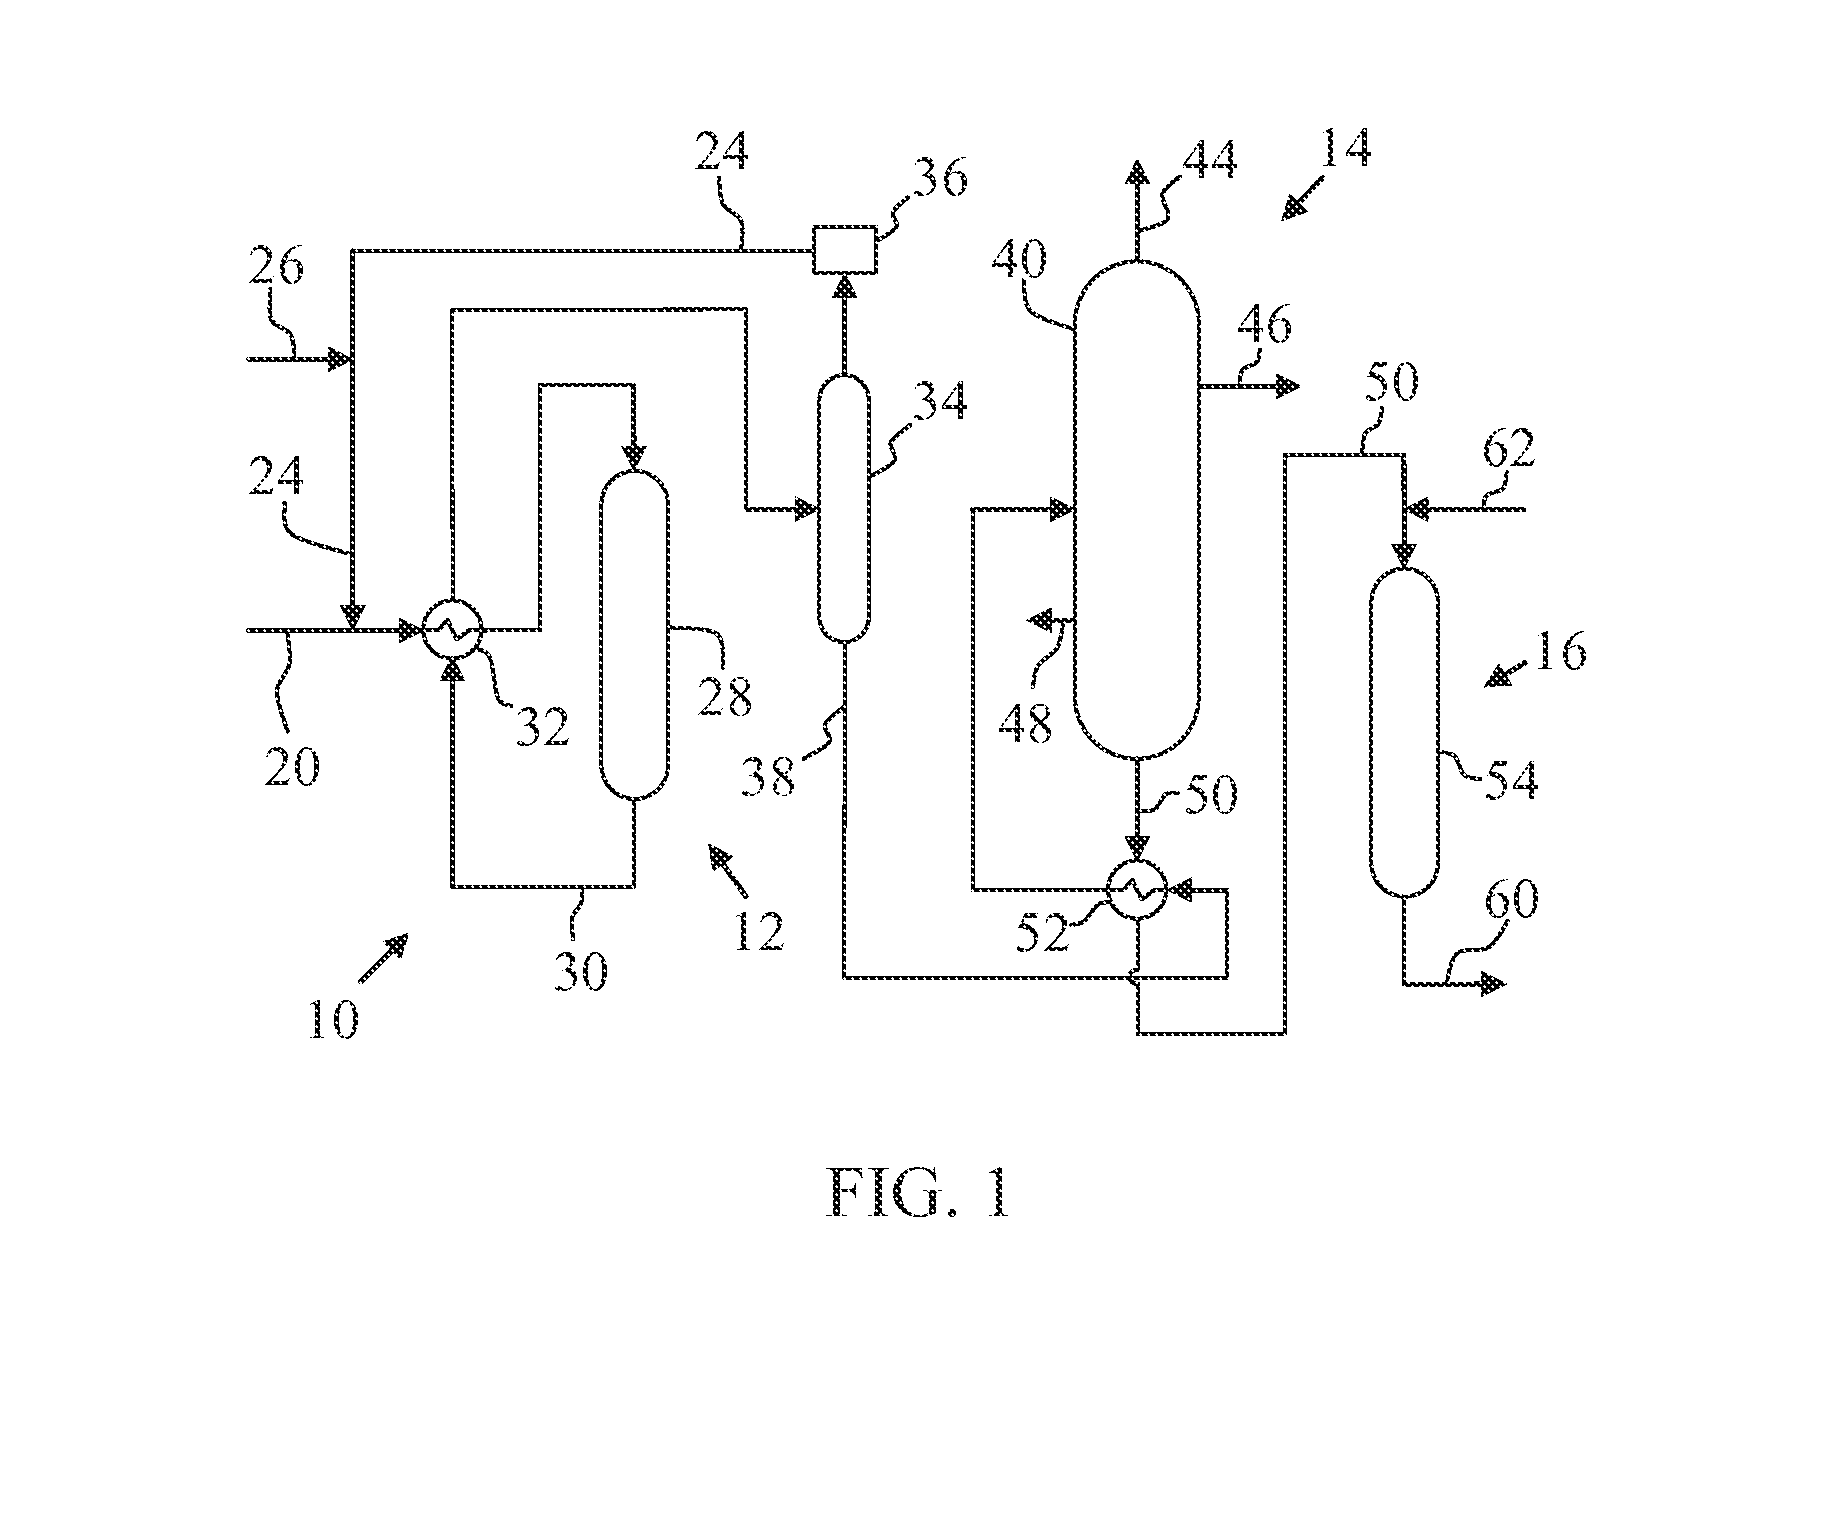 Methods and apparatuses for forming low-aromatic high-octane product streams